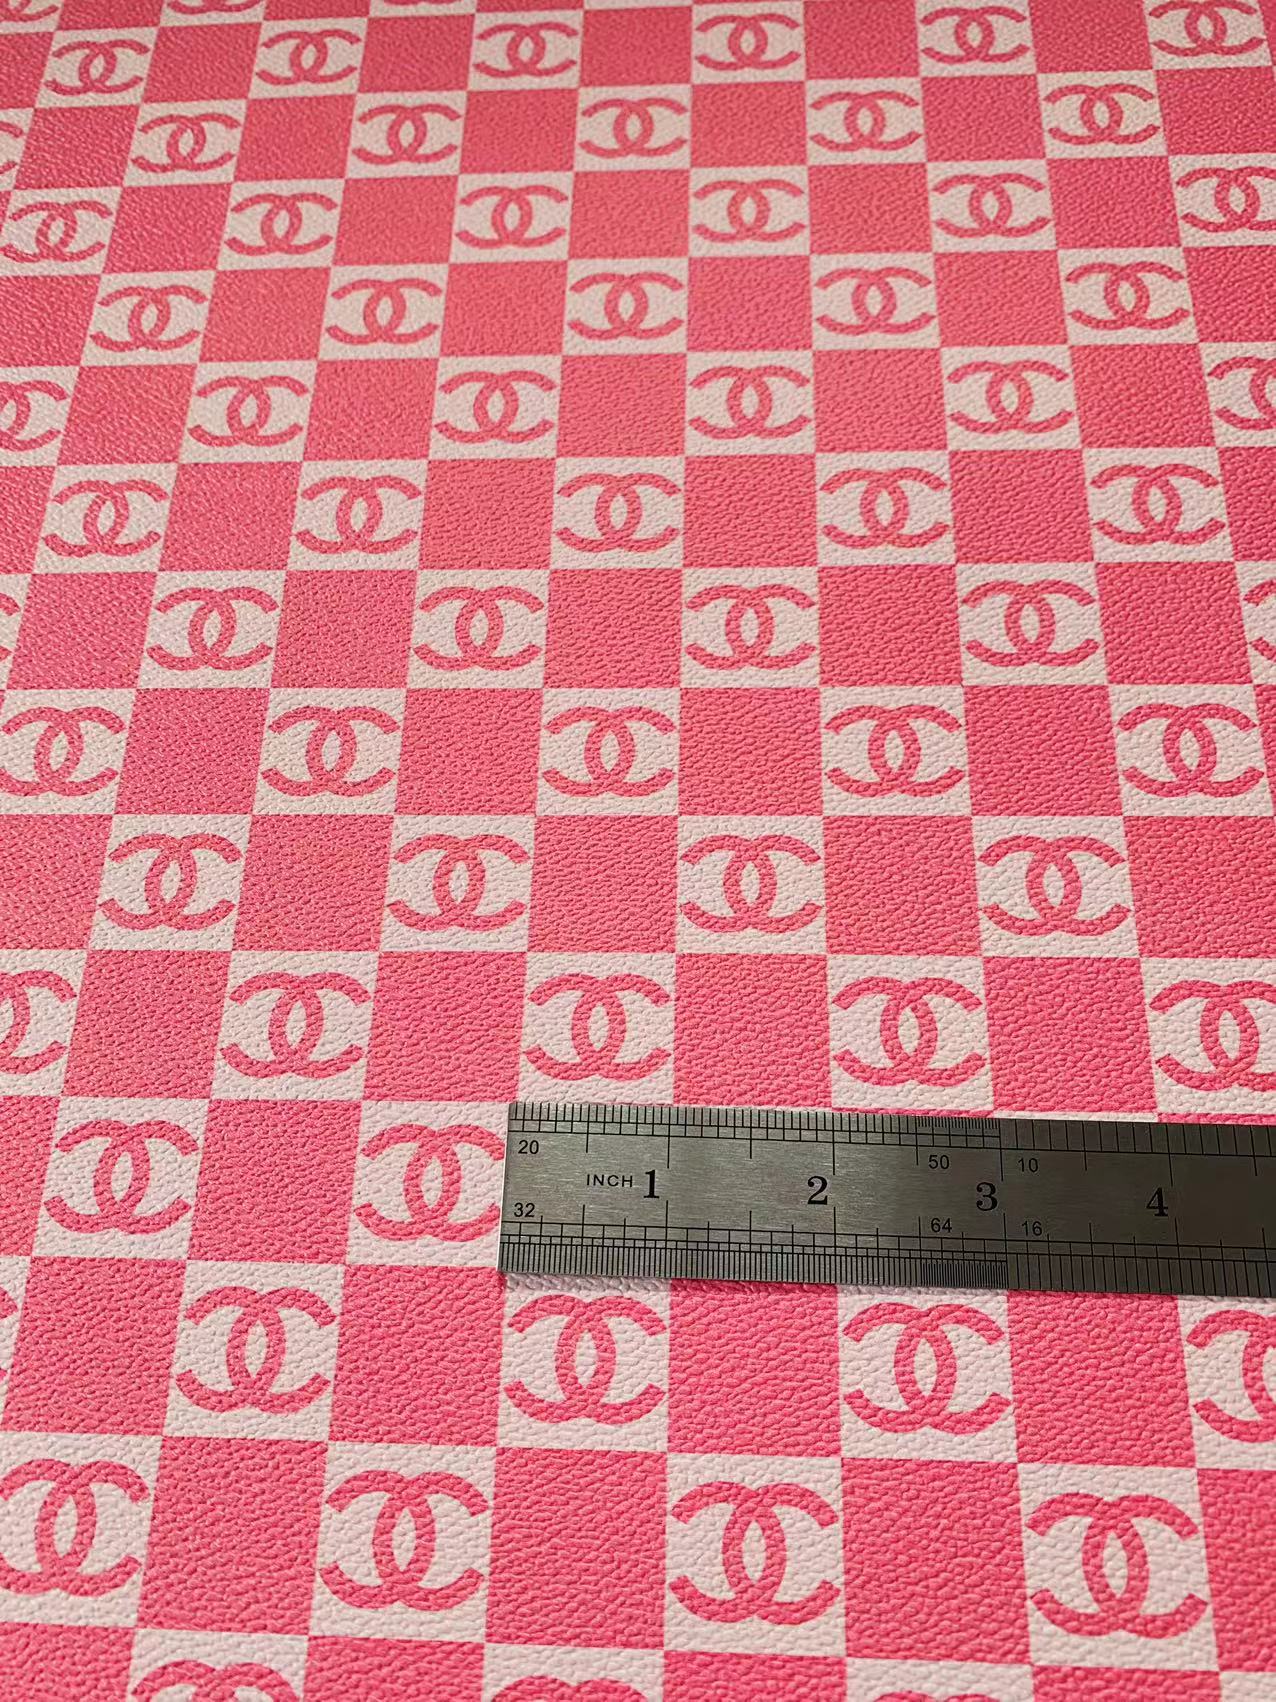 Fashion 1 inch Size Pink Chanel Design Leather Fabric For Handmade